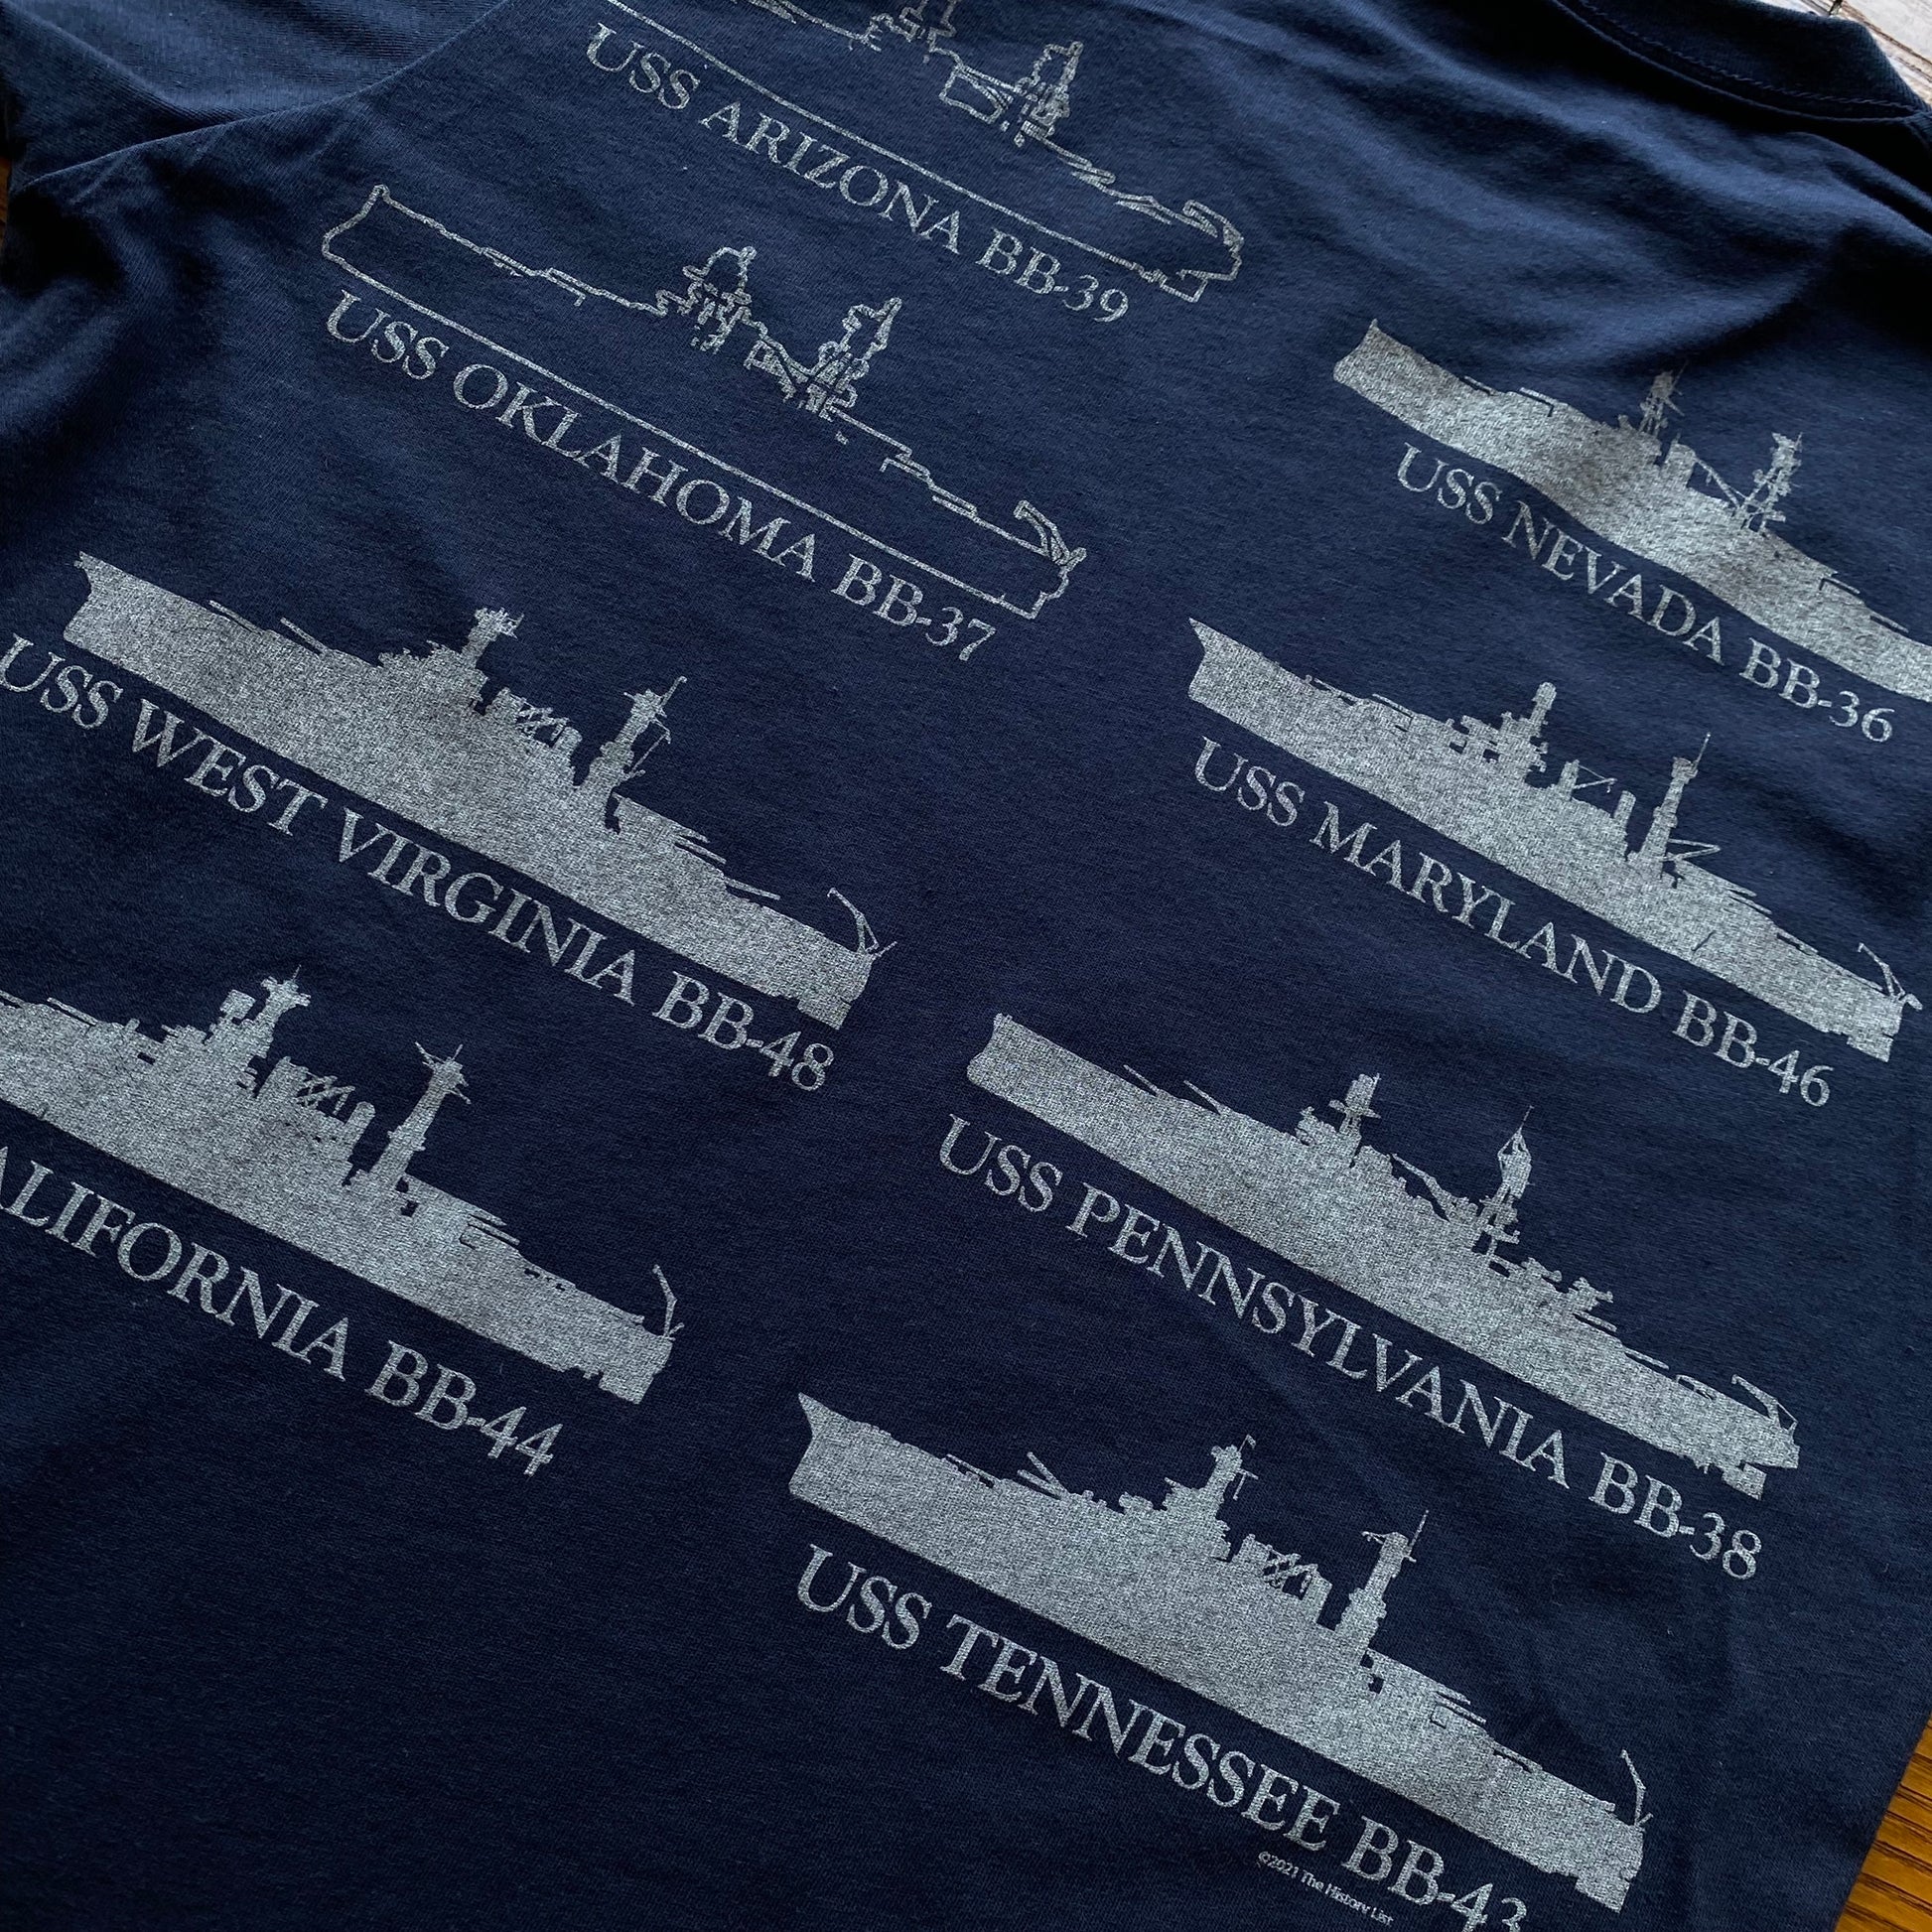 Back design of Pearl Harbor “Battleship Row” Shirt from The History List store